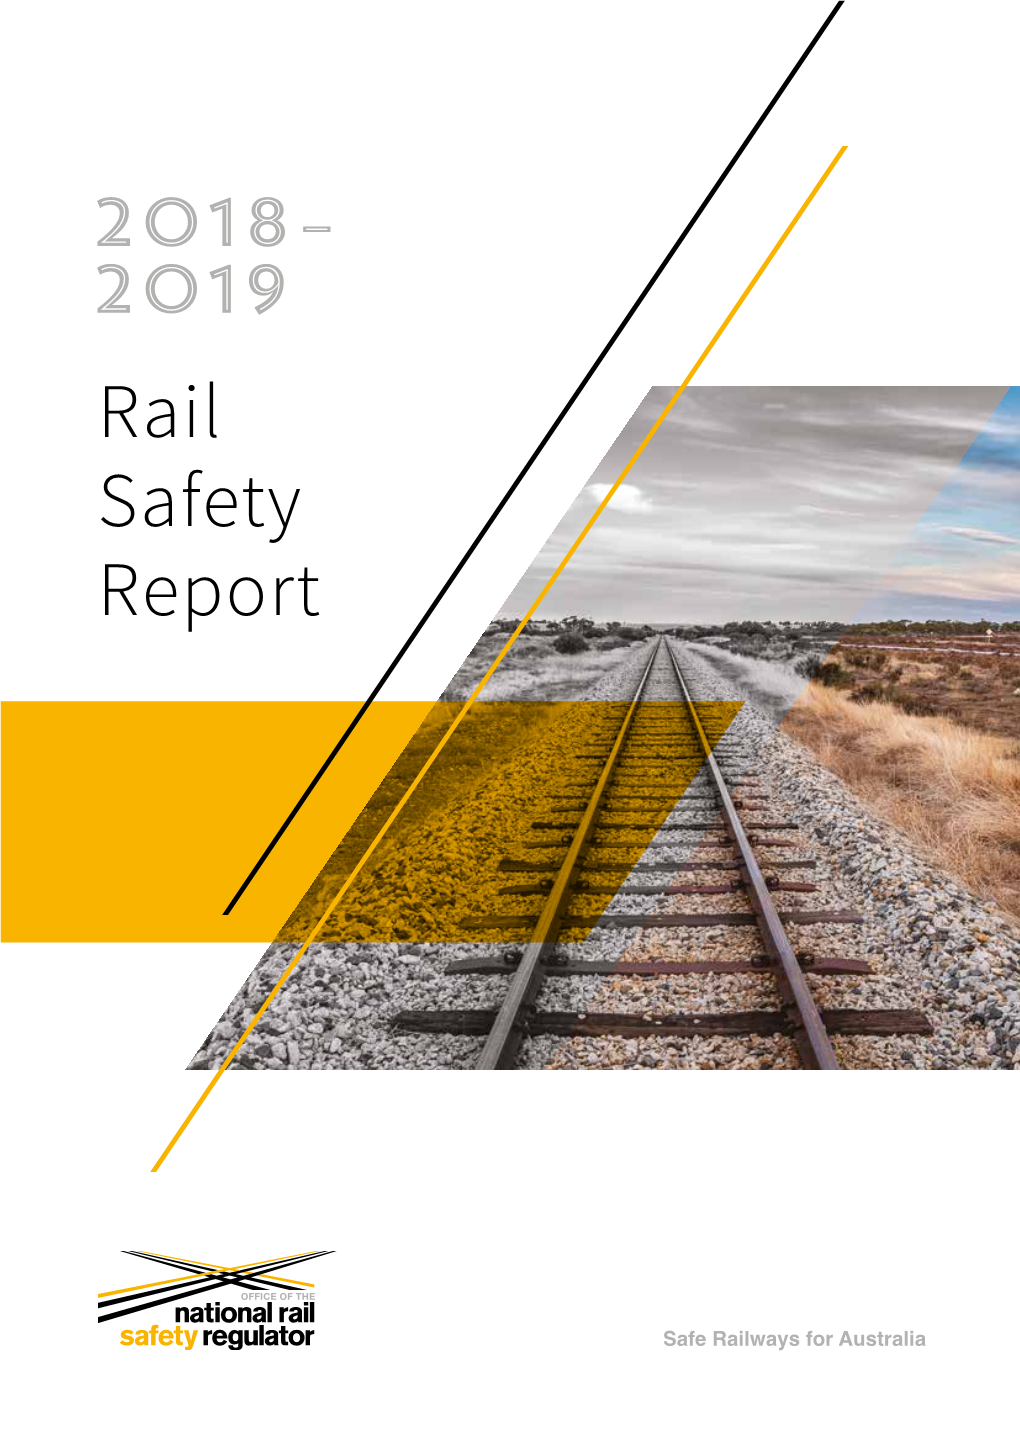 Rail Safety Report 2018-2019